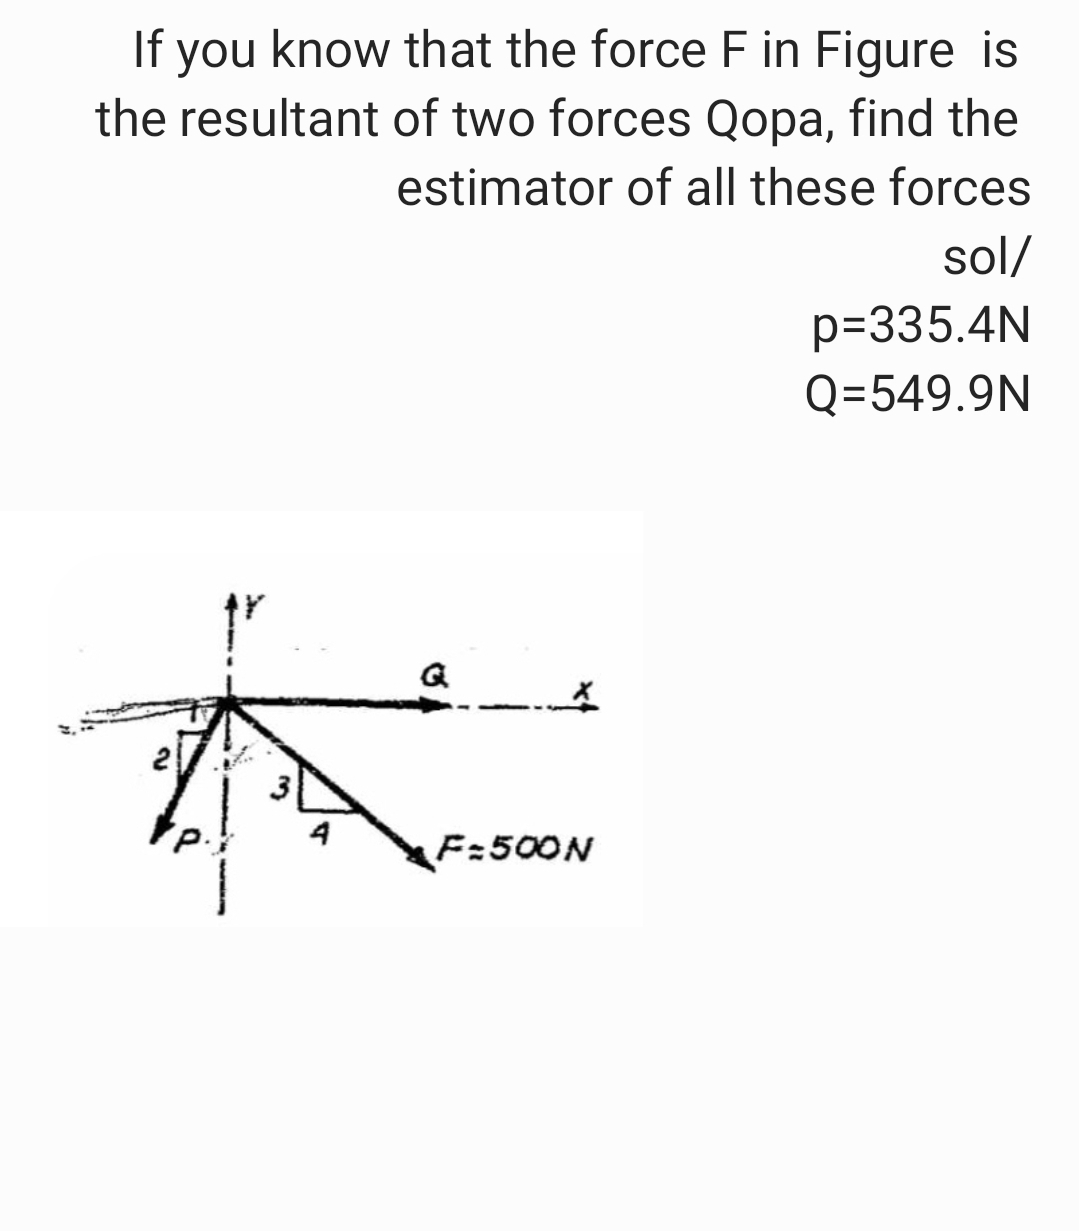 If you know that the force F in Figure is
the resultant of two forces Qopa, find the
estimator of all these forces
sol/
A
4
2
F=500N
p=335.4N
Q=549.9N